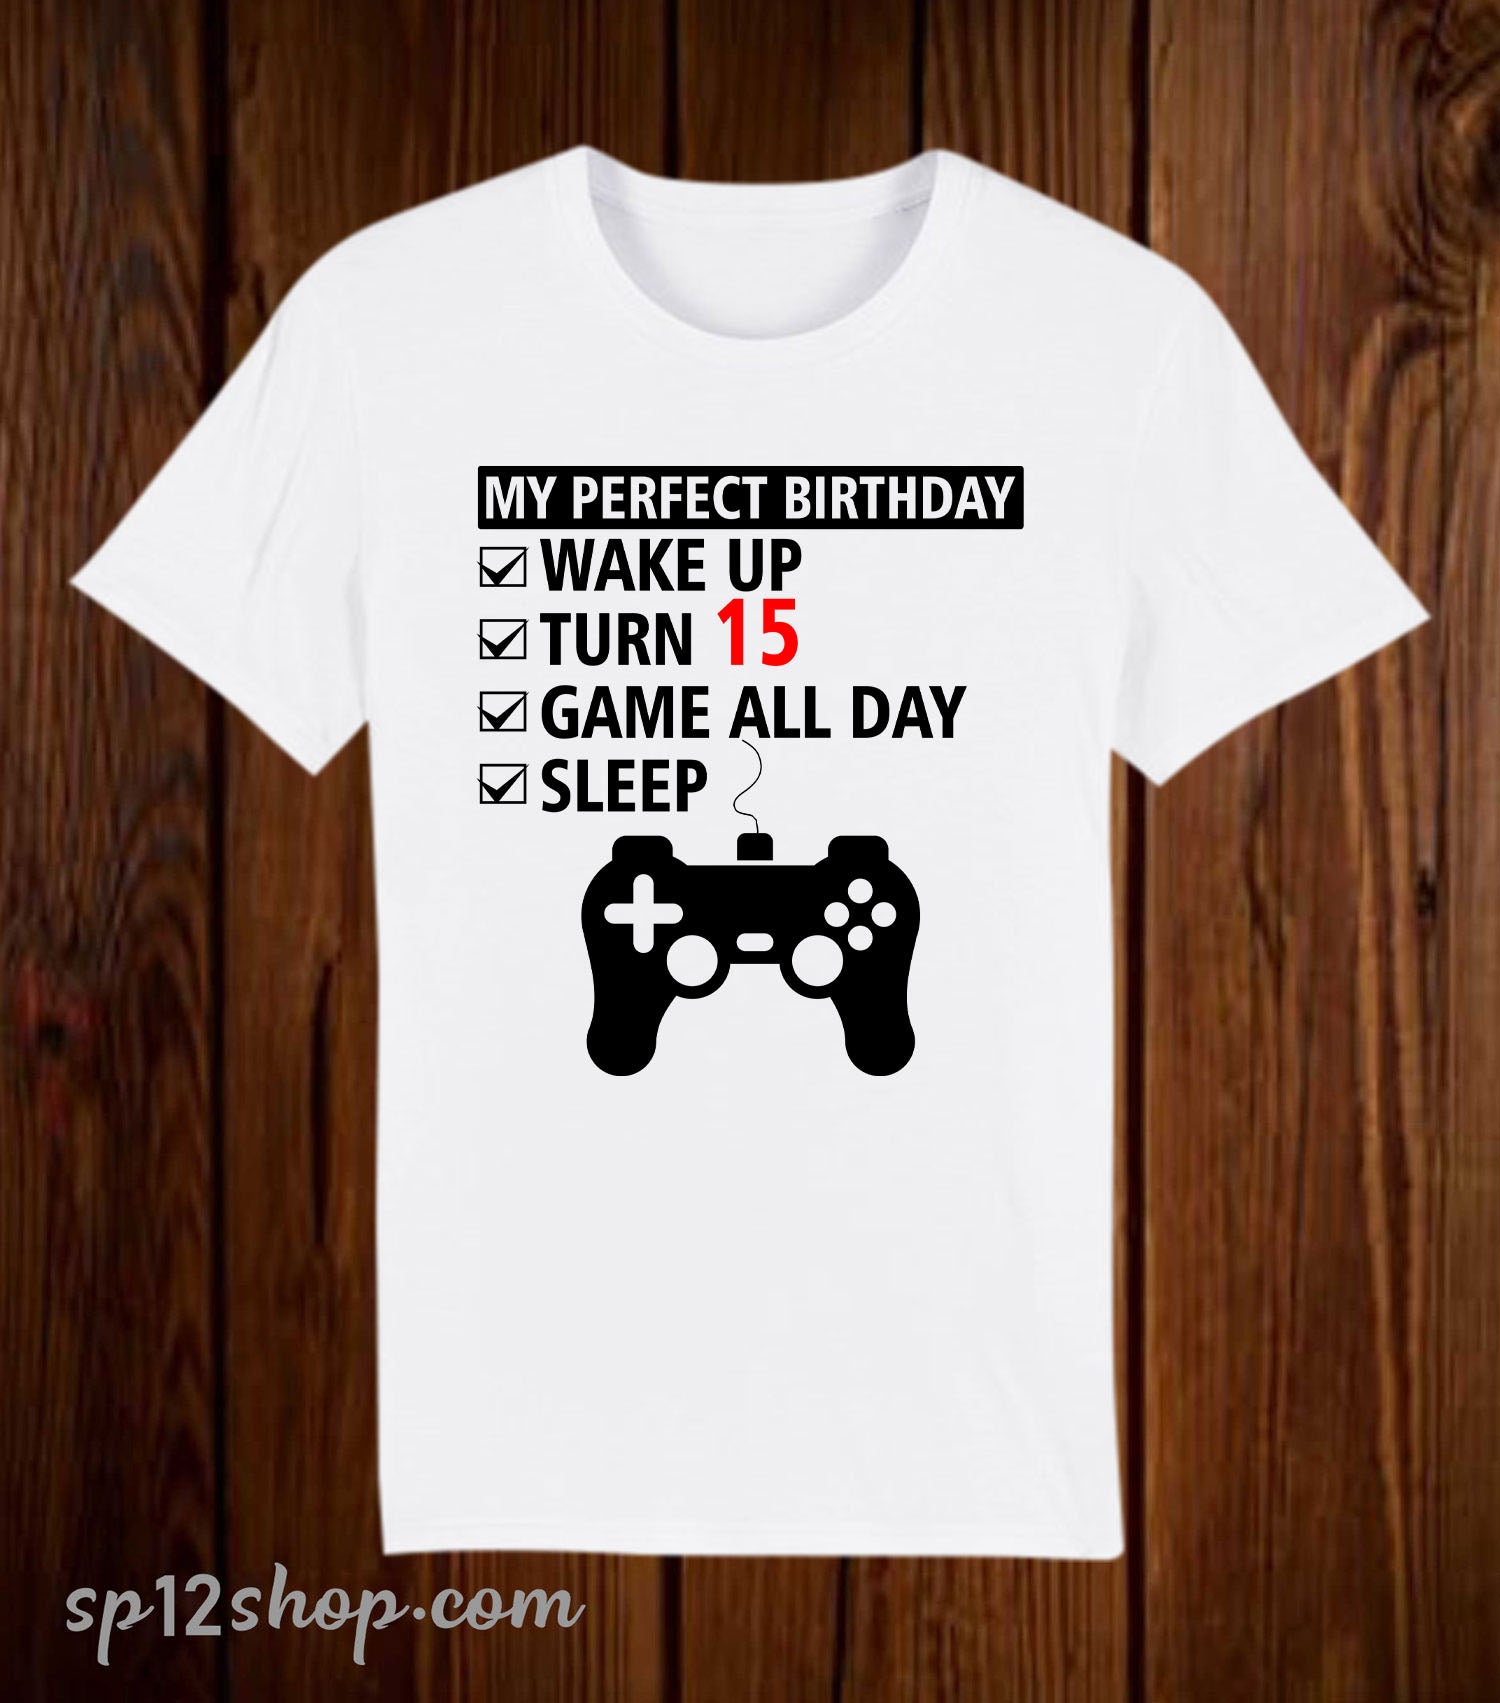 Personalised Birthday T Shirts for Gamer Game All Day Gaming Tshirts Custom Number Year Gift